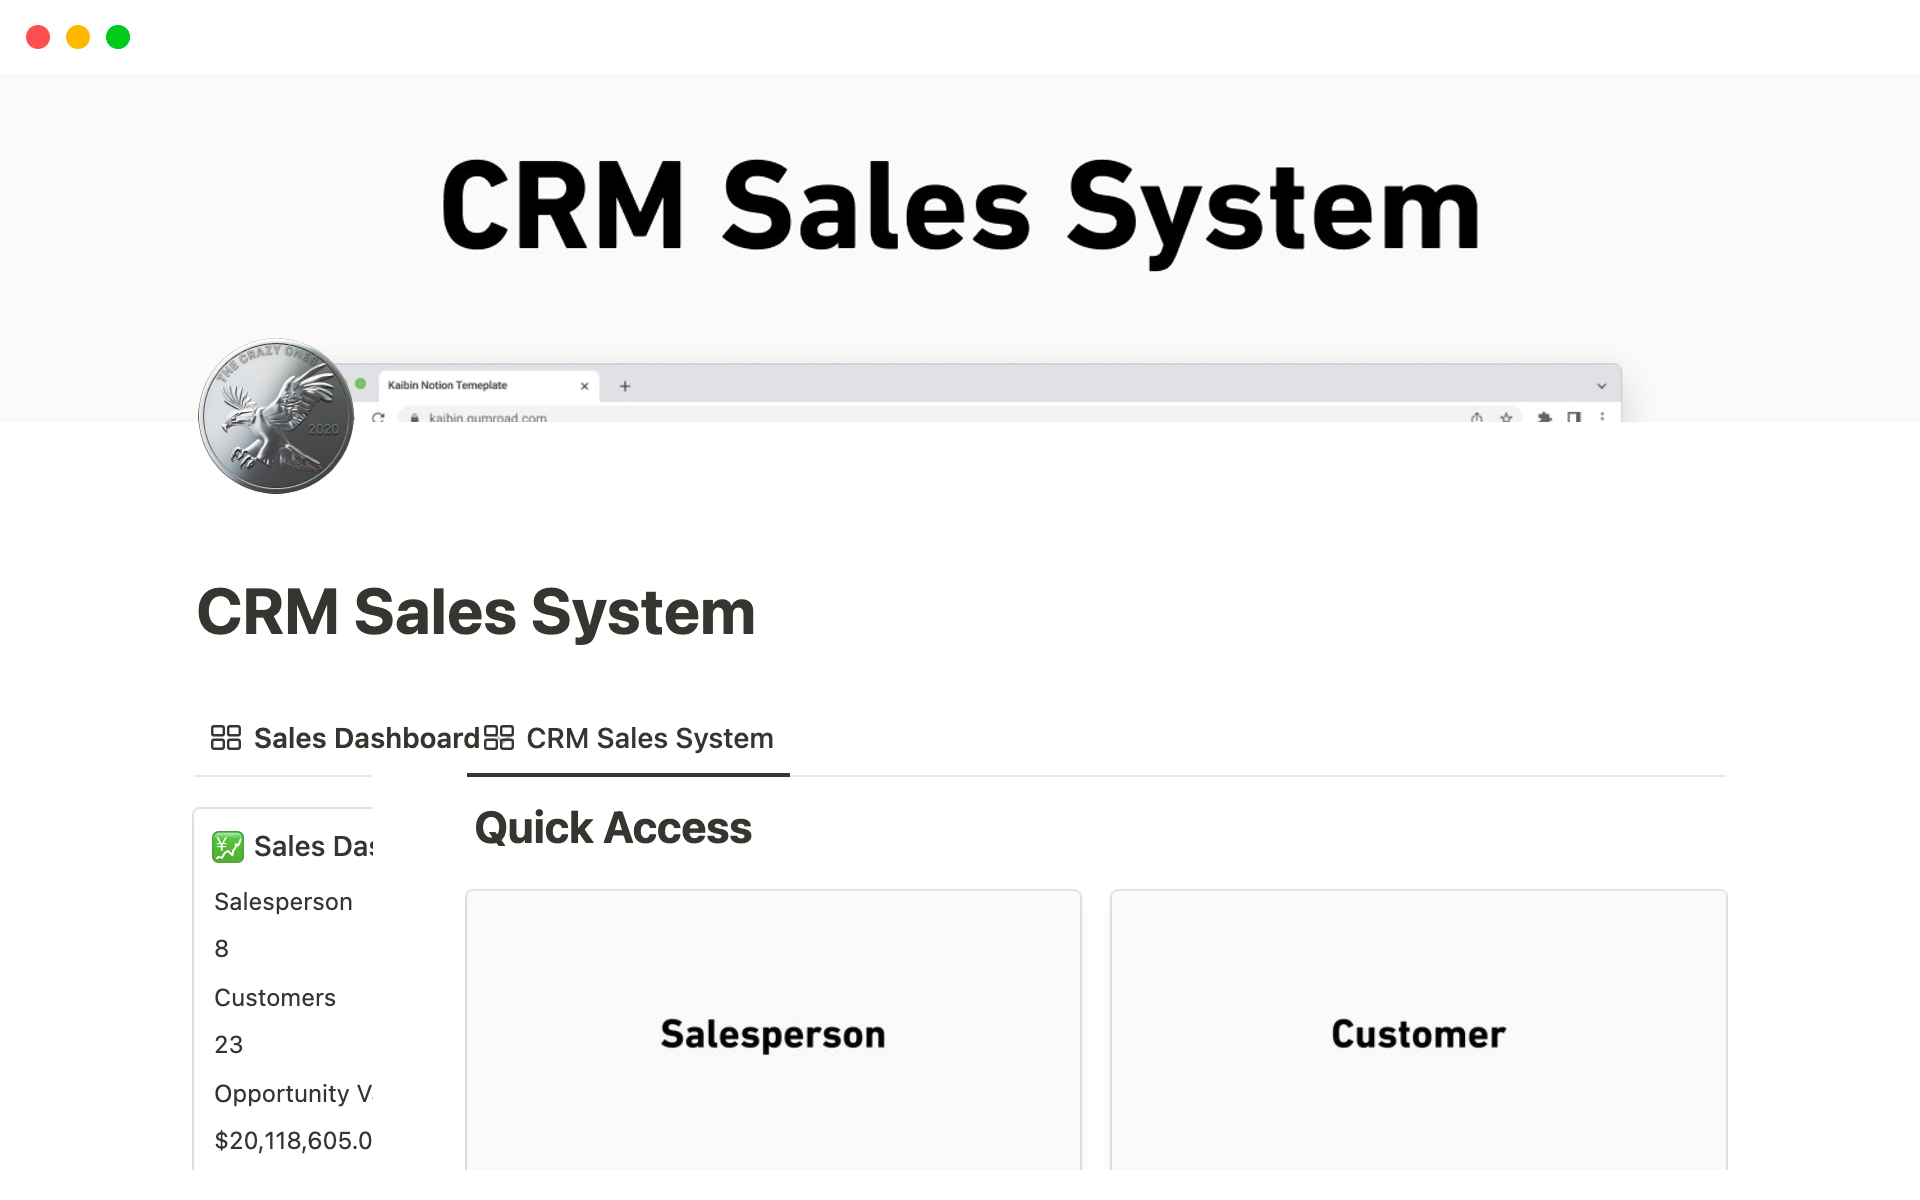 CRM Sales System helps you better manage sales leads and not miss any business opportunities.